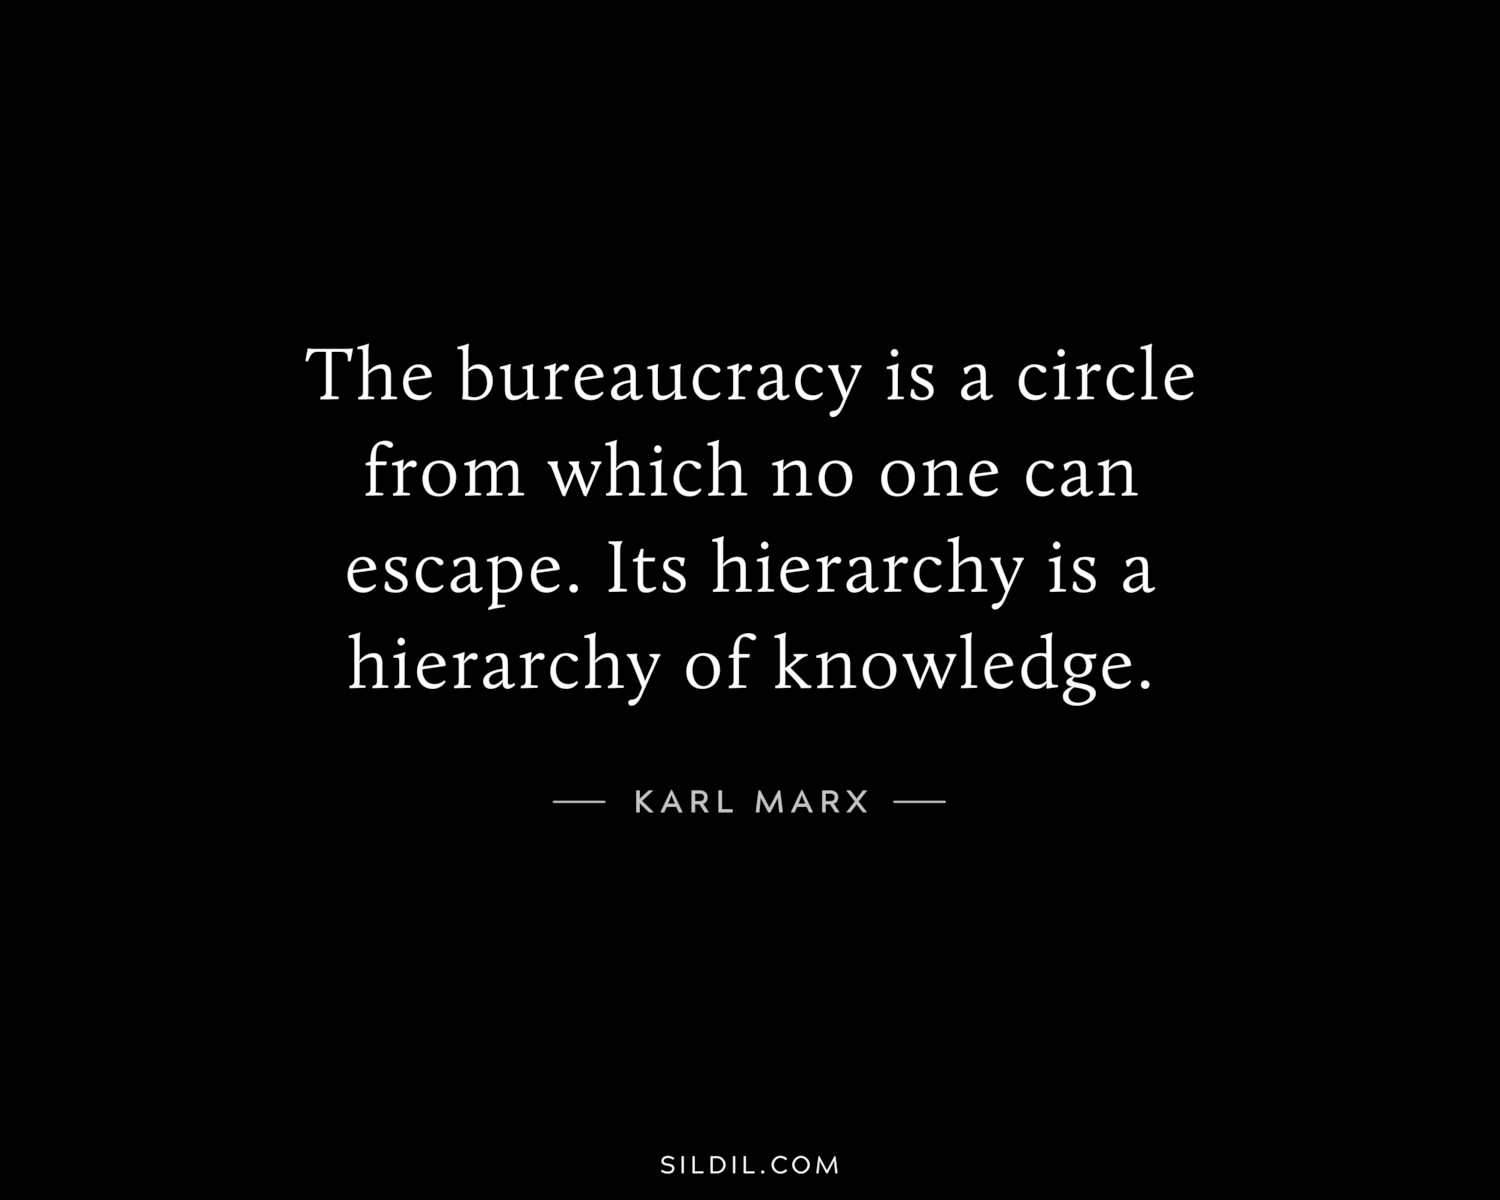 The bureaucracy is a circle from which no one can escape. Its hierarchy is a hierarchy of knowledge.